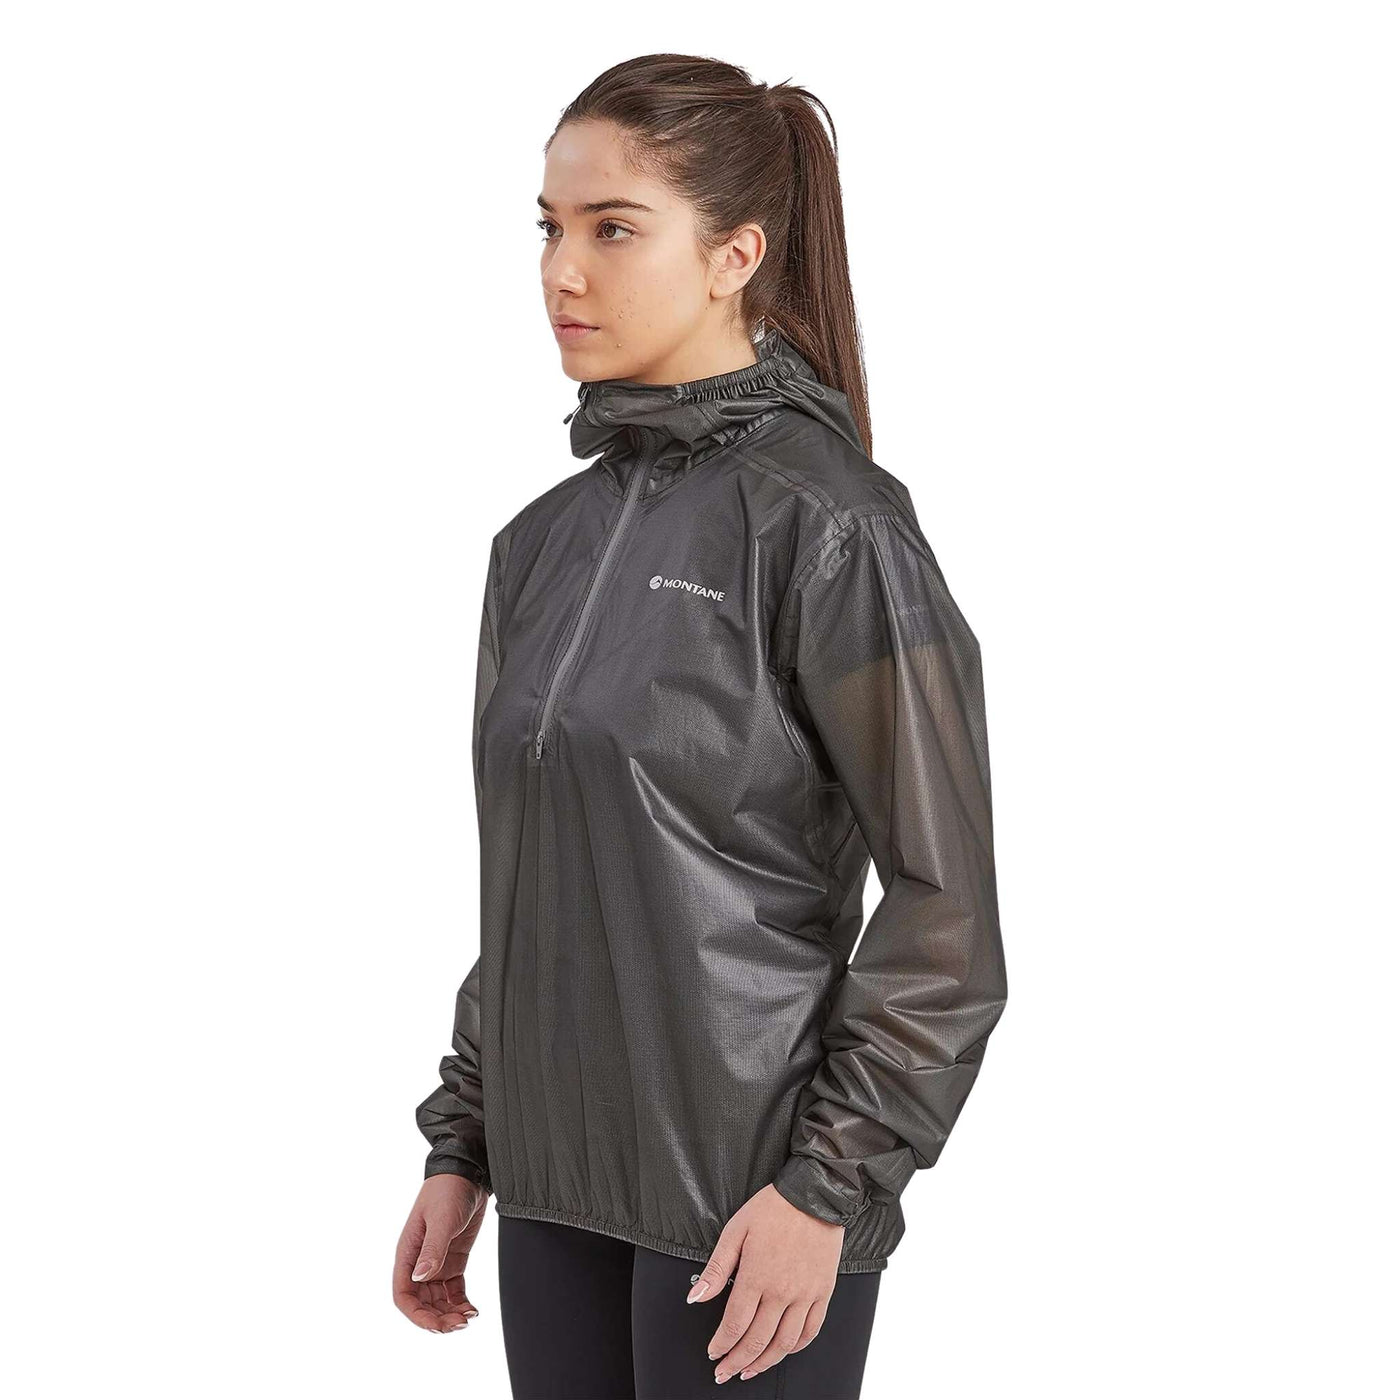 Montane Minimus Nano Pull-On - Unisex | Wateroproof Running Jacket NZ | Further Faster Christchurch NZ #charcoal